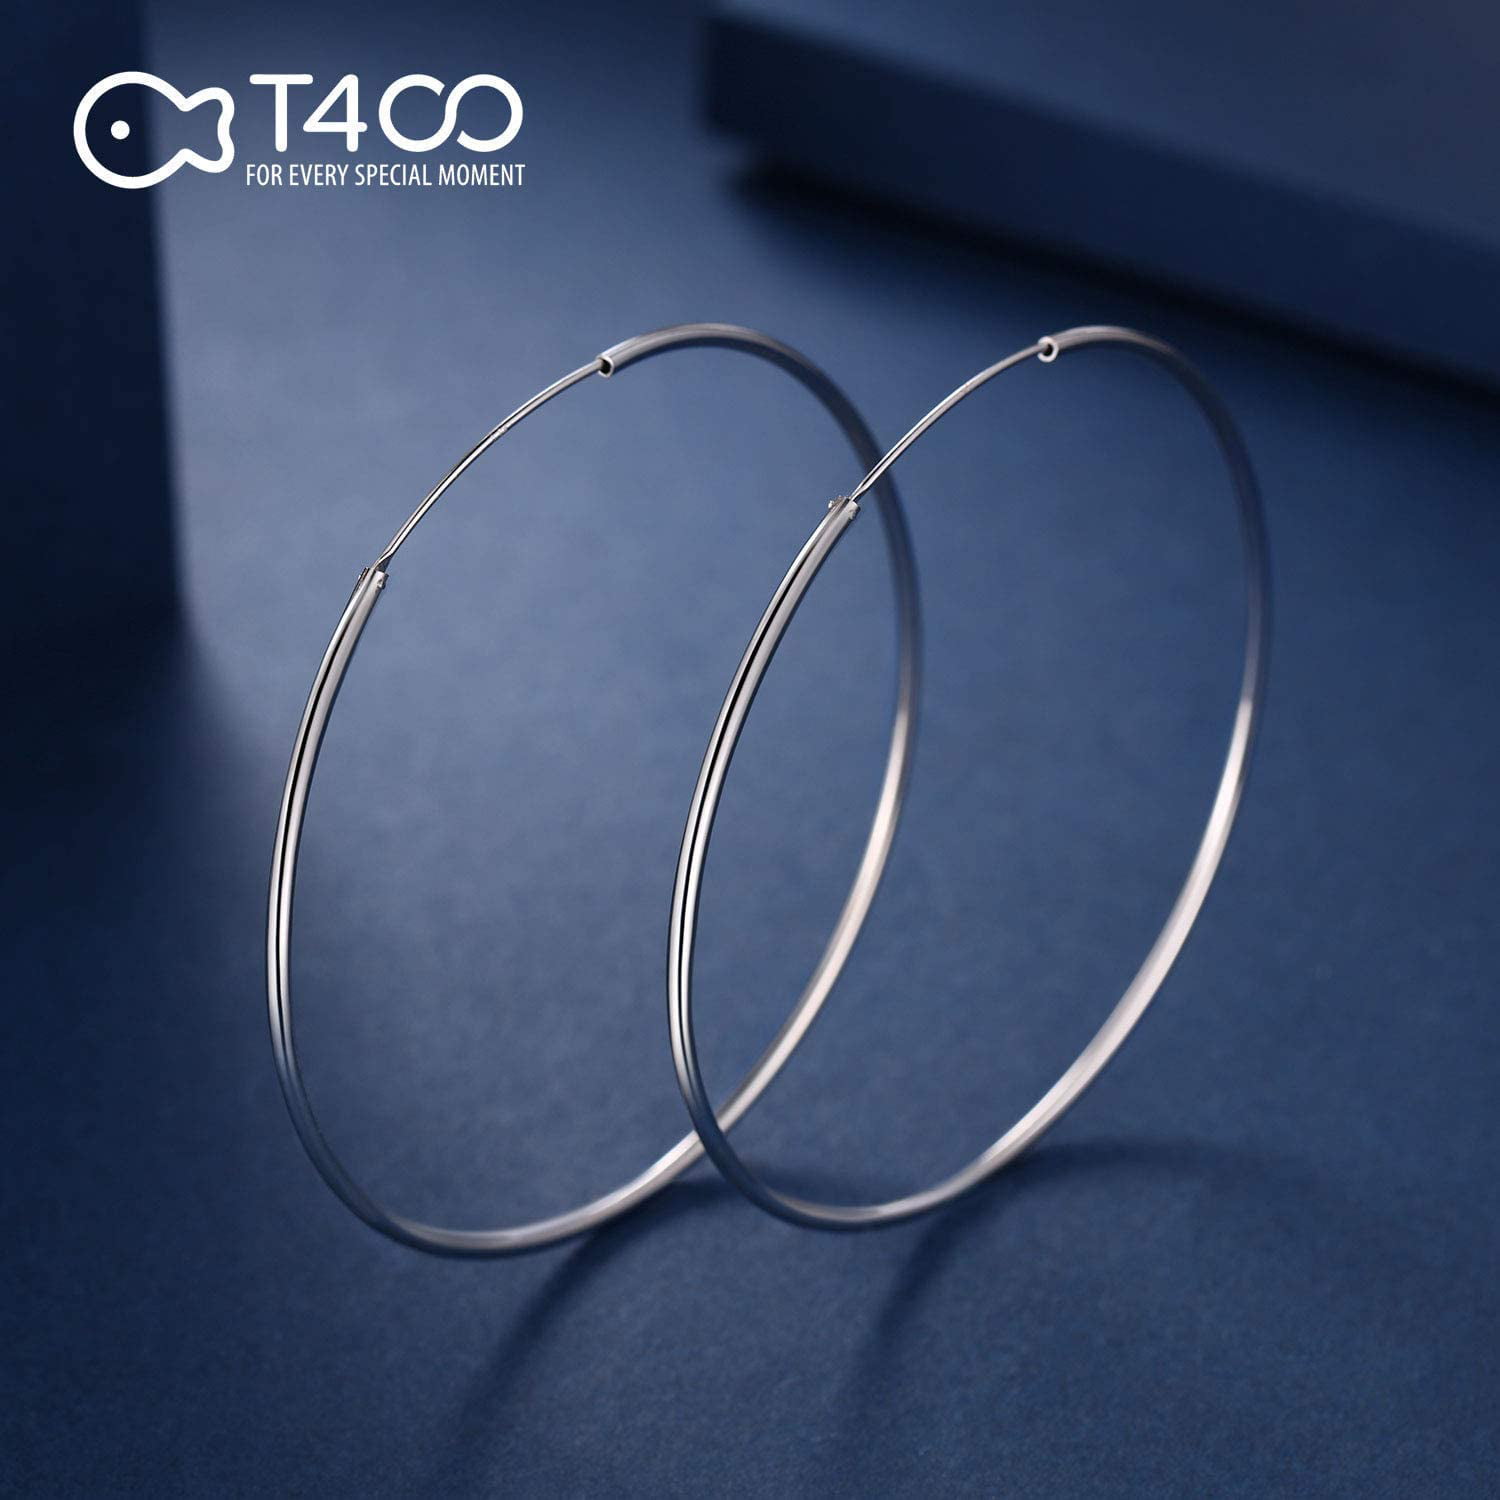 T400 925 Sterling Silver Hoop Earrings Large and Small Thin Lightweight Hoops Gift for Women 15 20 25 35 40 45 50 55 60 65 70 75 mm